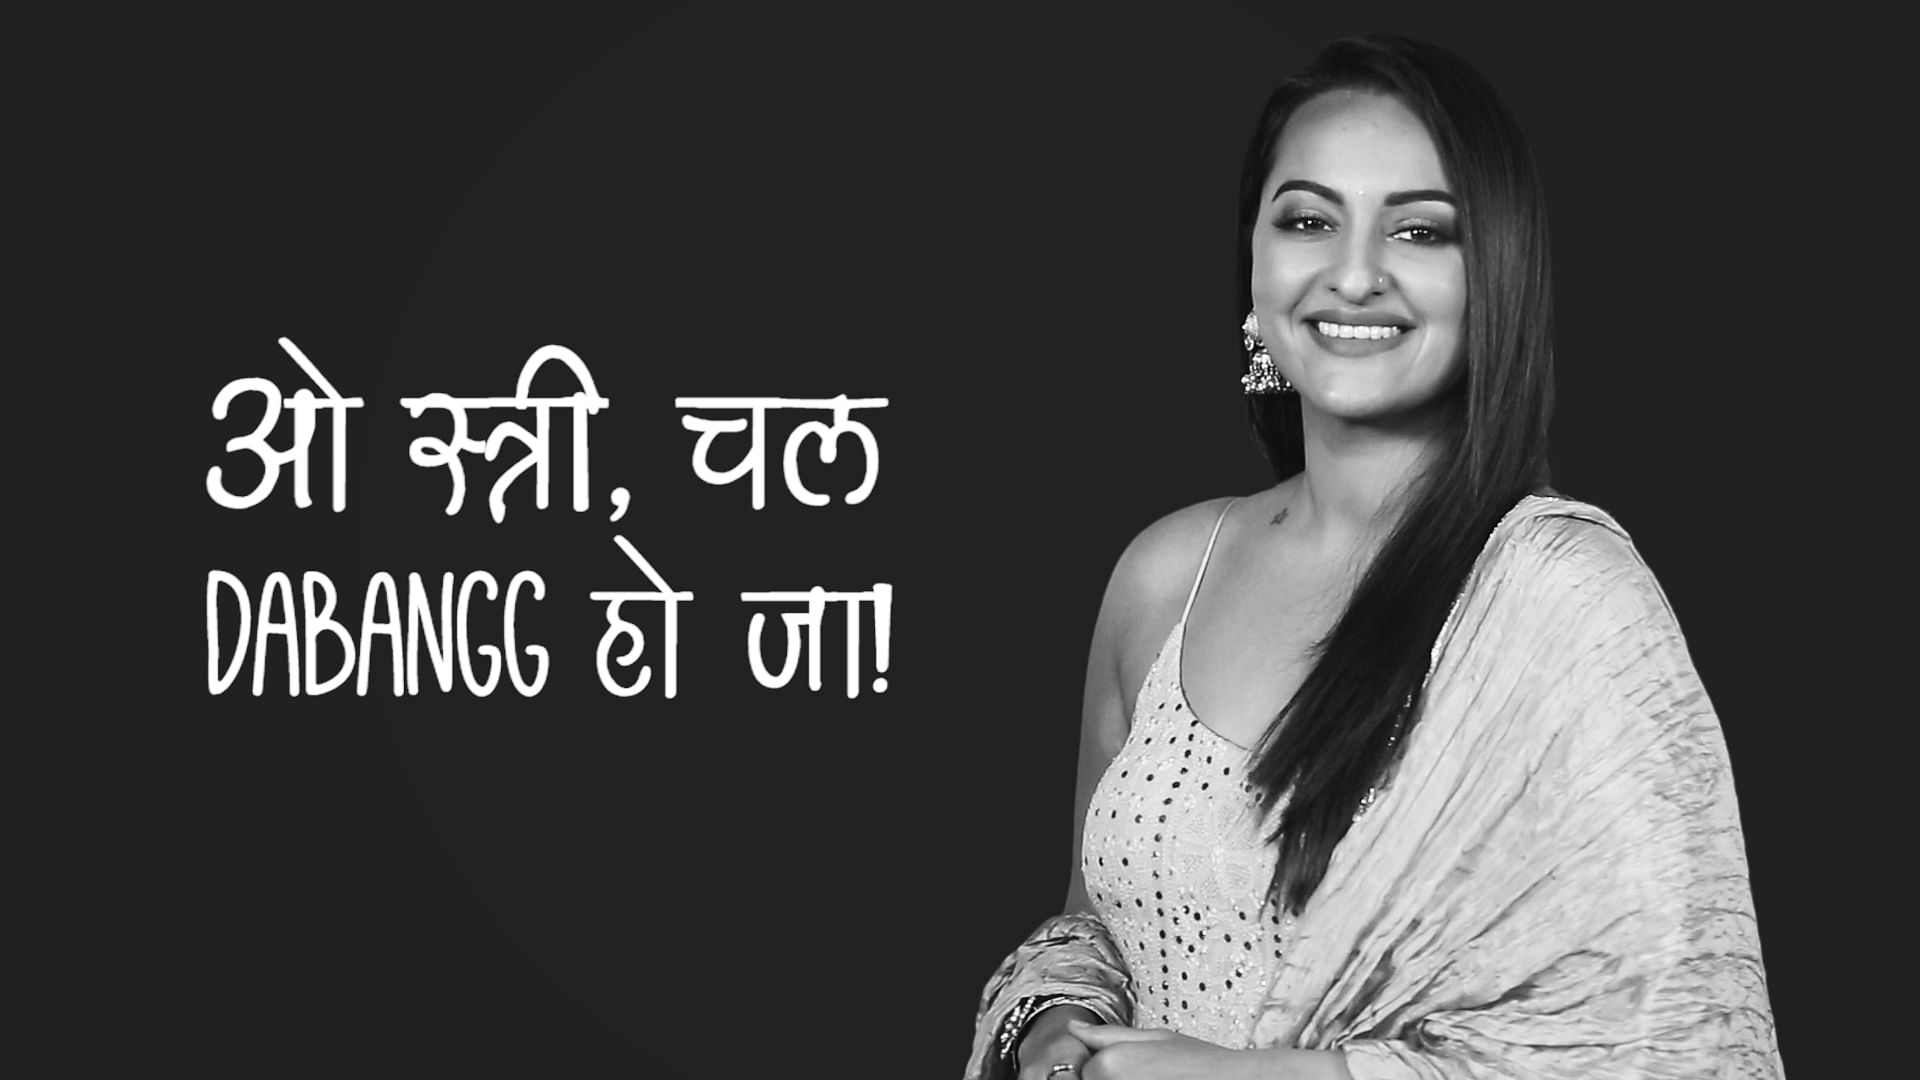 Watch Sonakshi Sinha slam stereotypes that are imposed on women for eons.&nbsp;